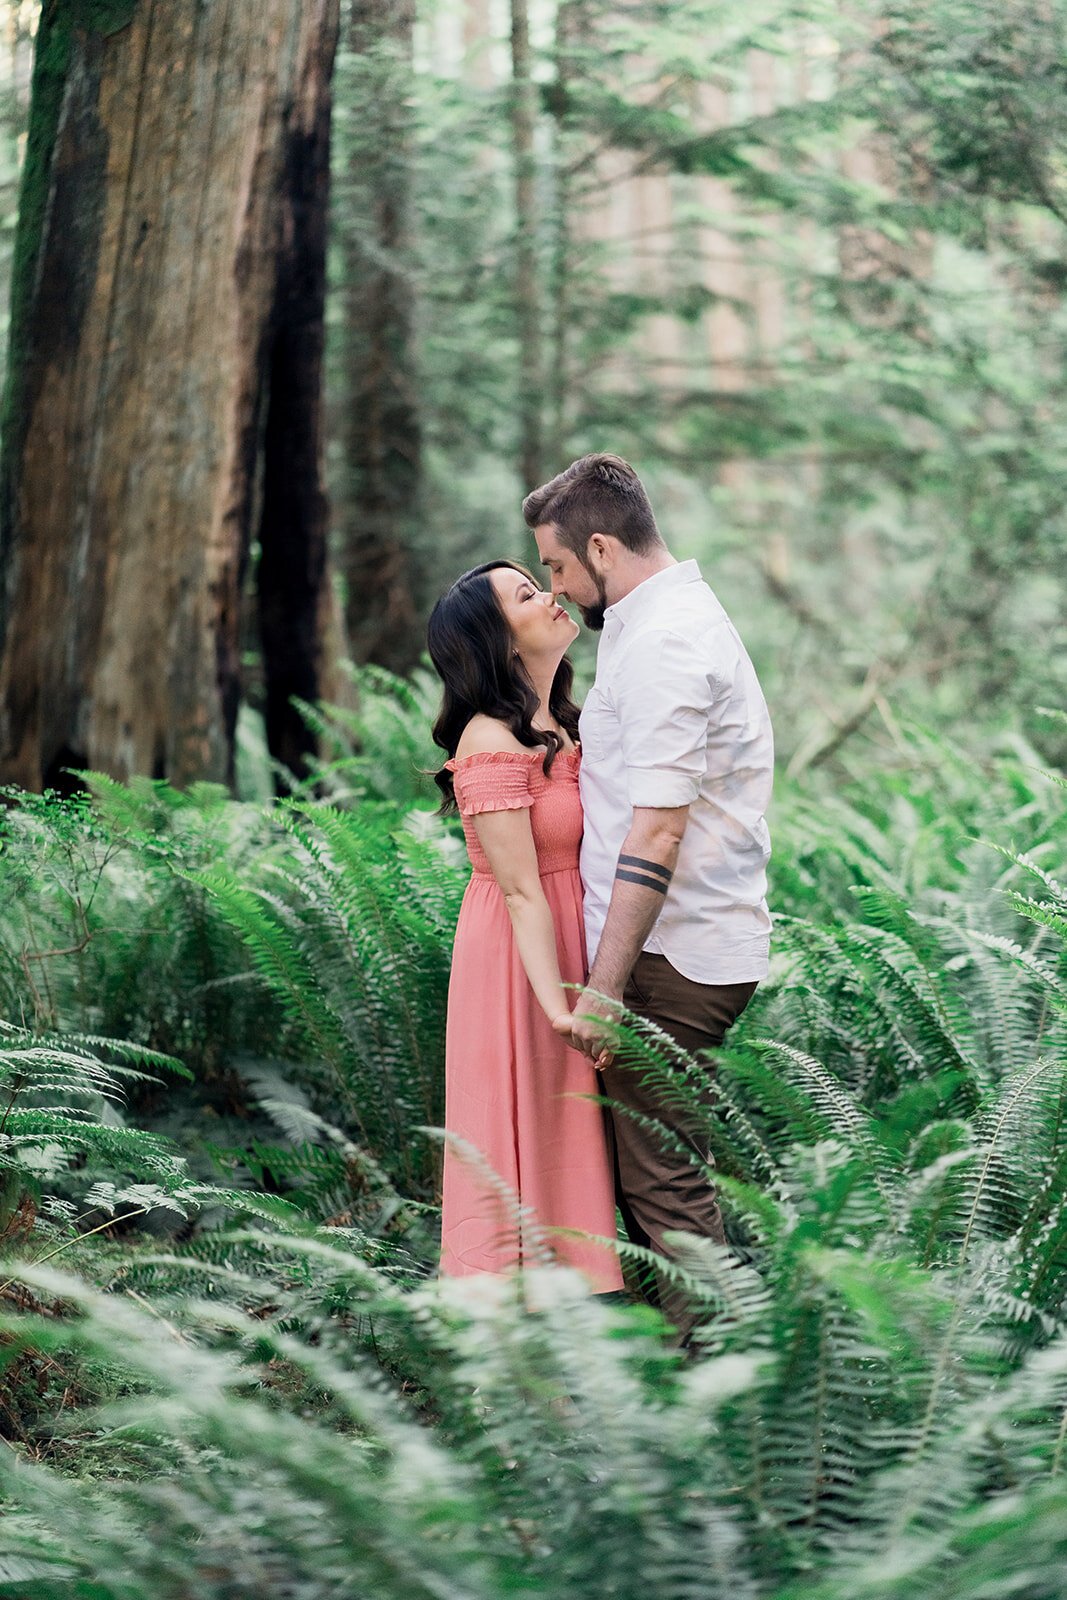 A woman in a cute pink dress holds her fiancee's hands as she kisses him, surrounded by ferns.